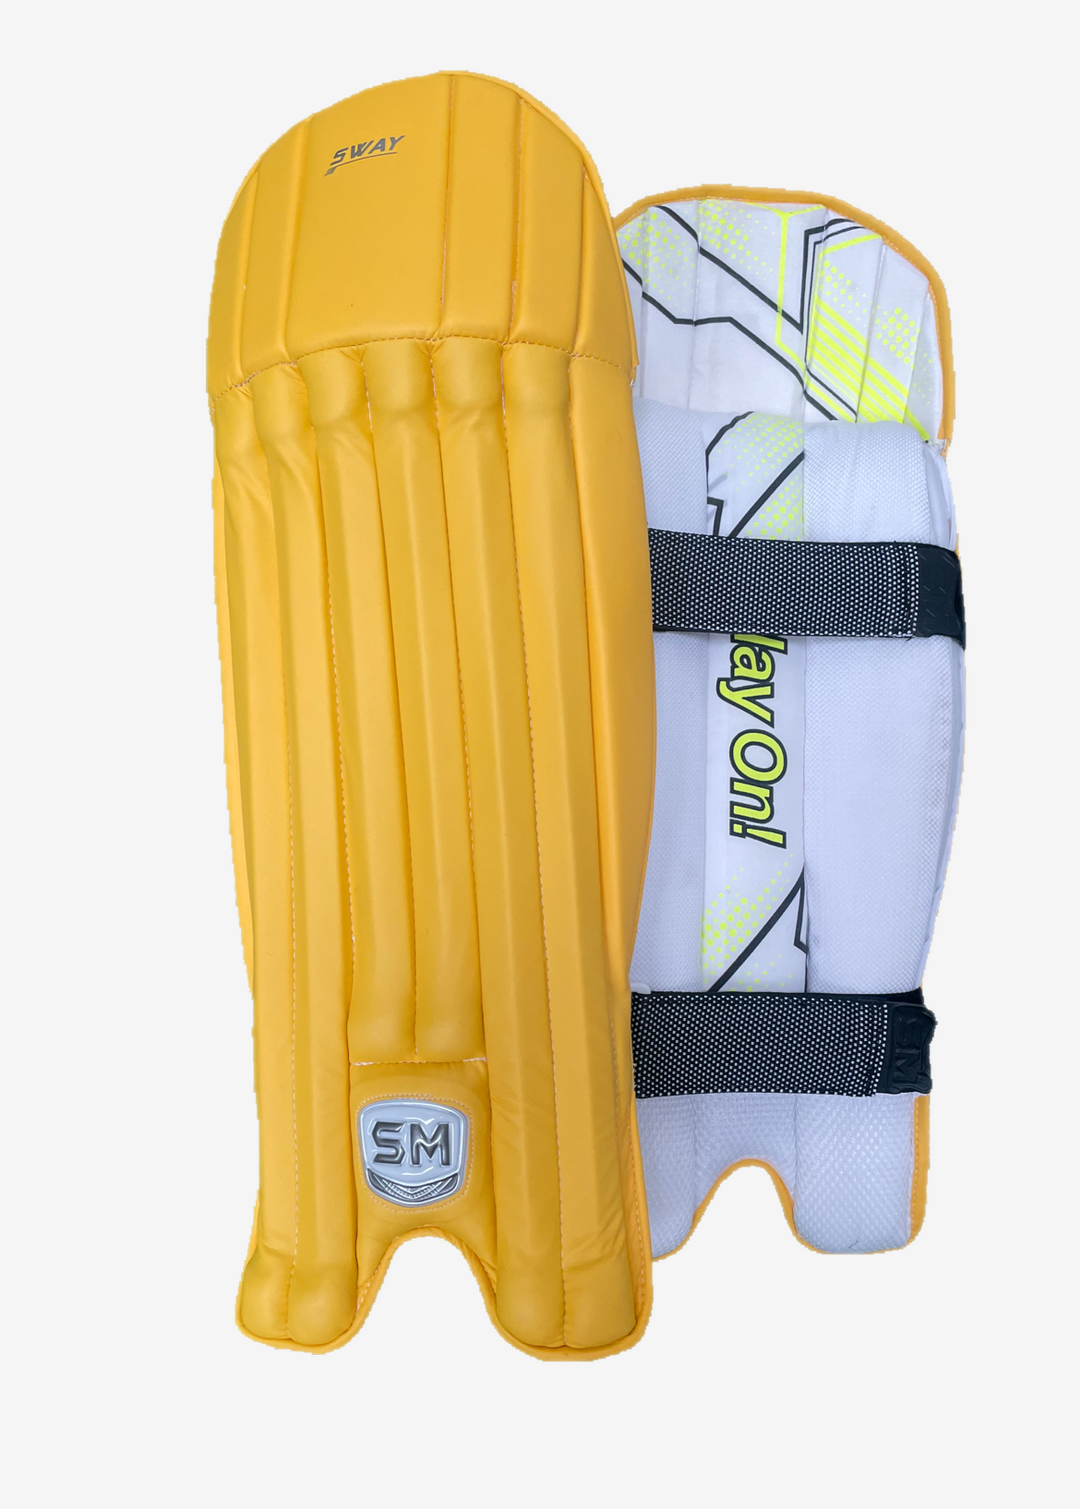 SM Coloured Wicket Keeping Pads